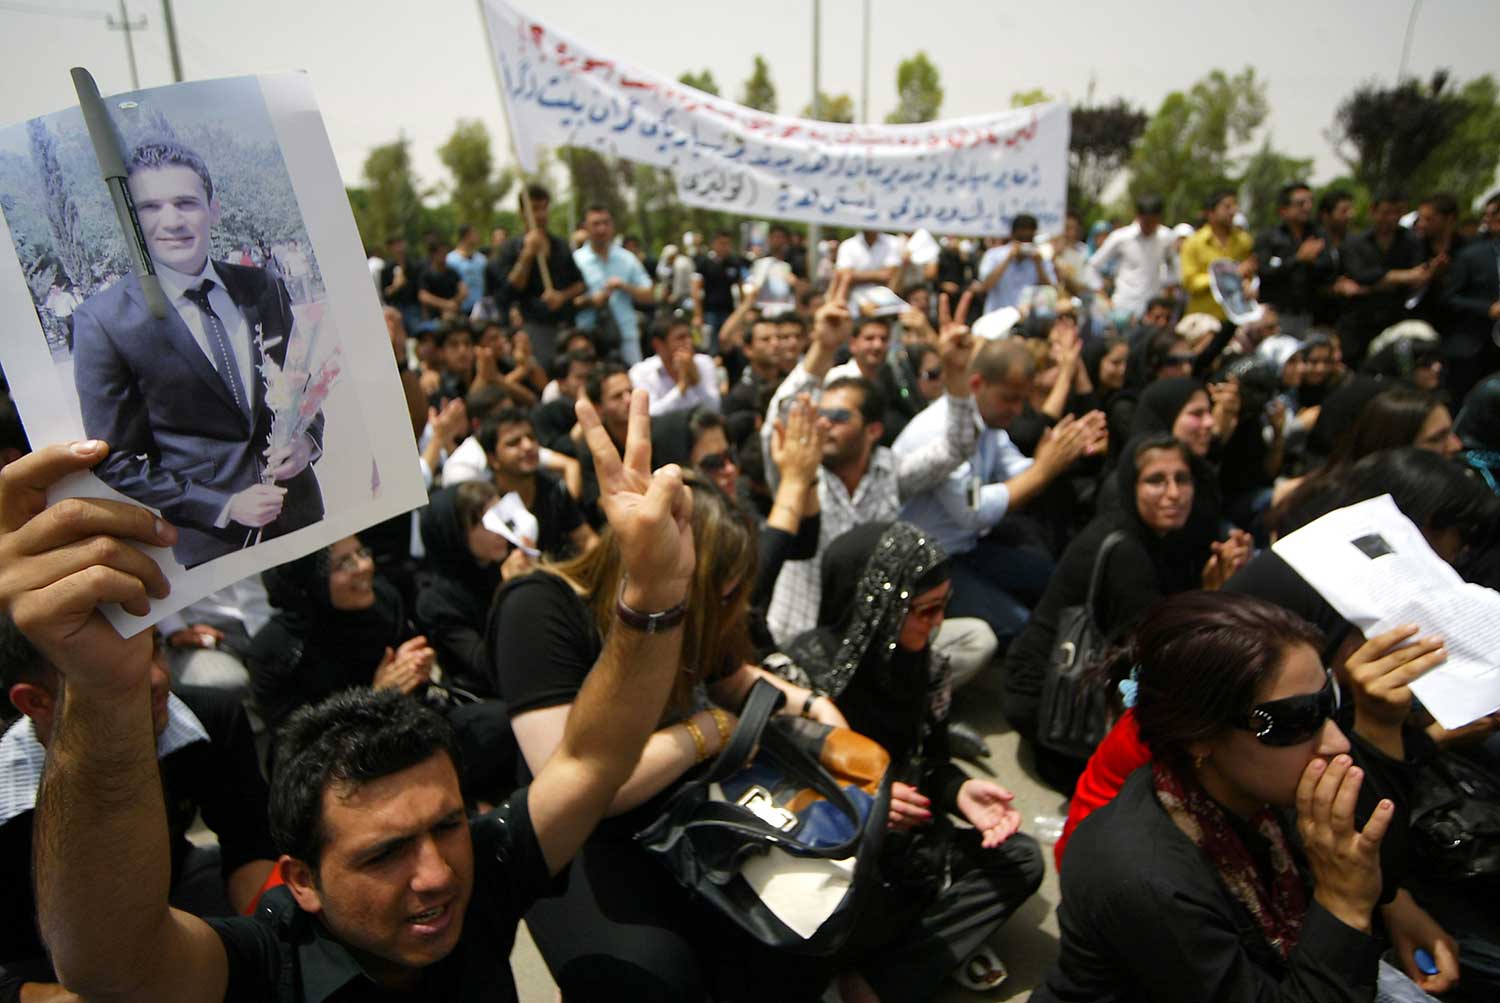 A Kurdish Muslim cleric on May 6, 2010, leads mourners in a prayer over Kurdish journalist and student Sardasht Osman who was kidnapped and killed that day in Erbil in the autonomous Kurdish region of Iraq. Seven years later, no one has been convicted of his murder. (AFP/Safin Hamed)